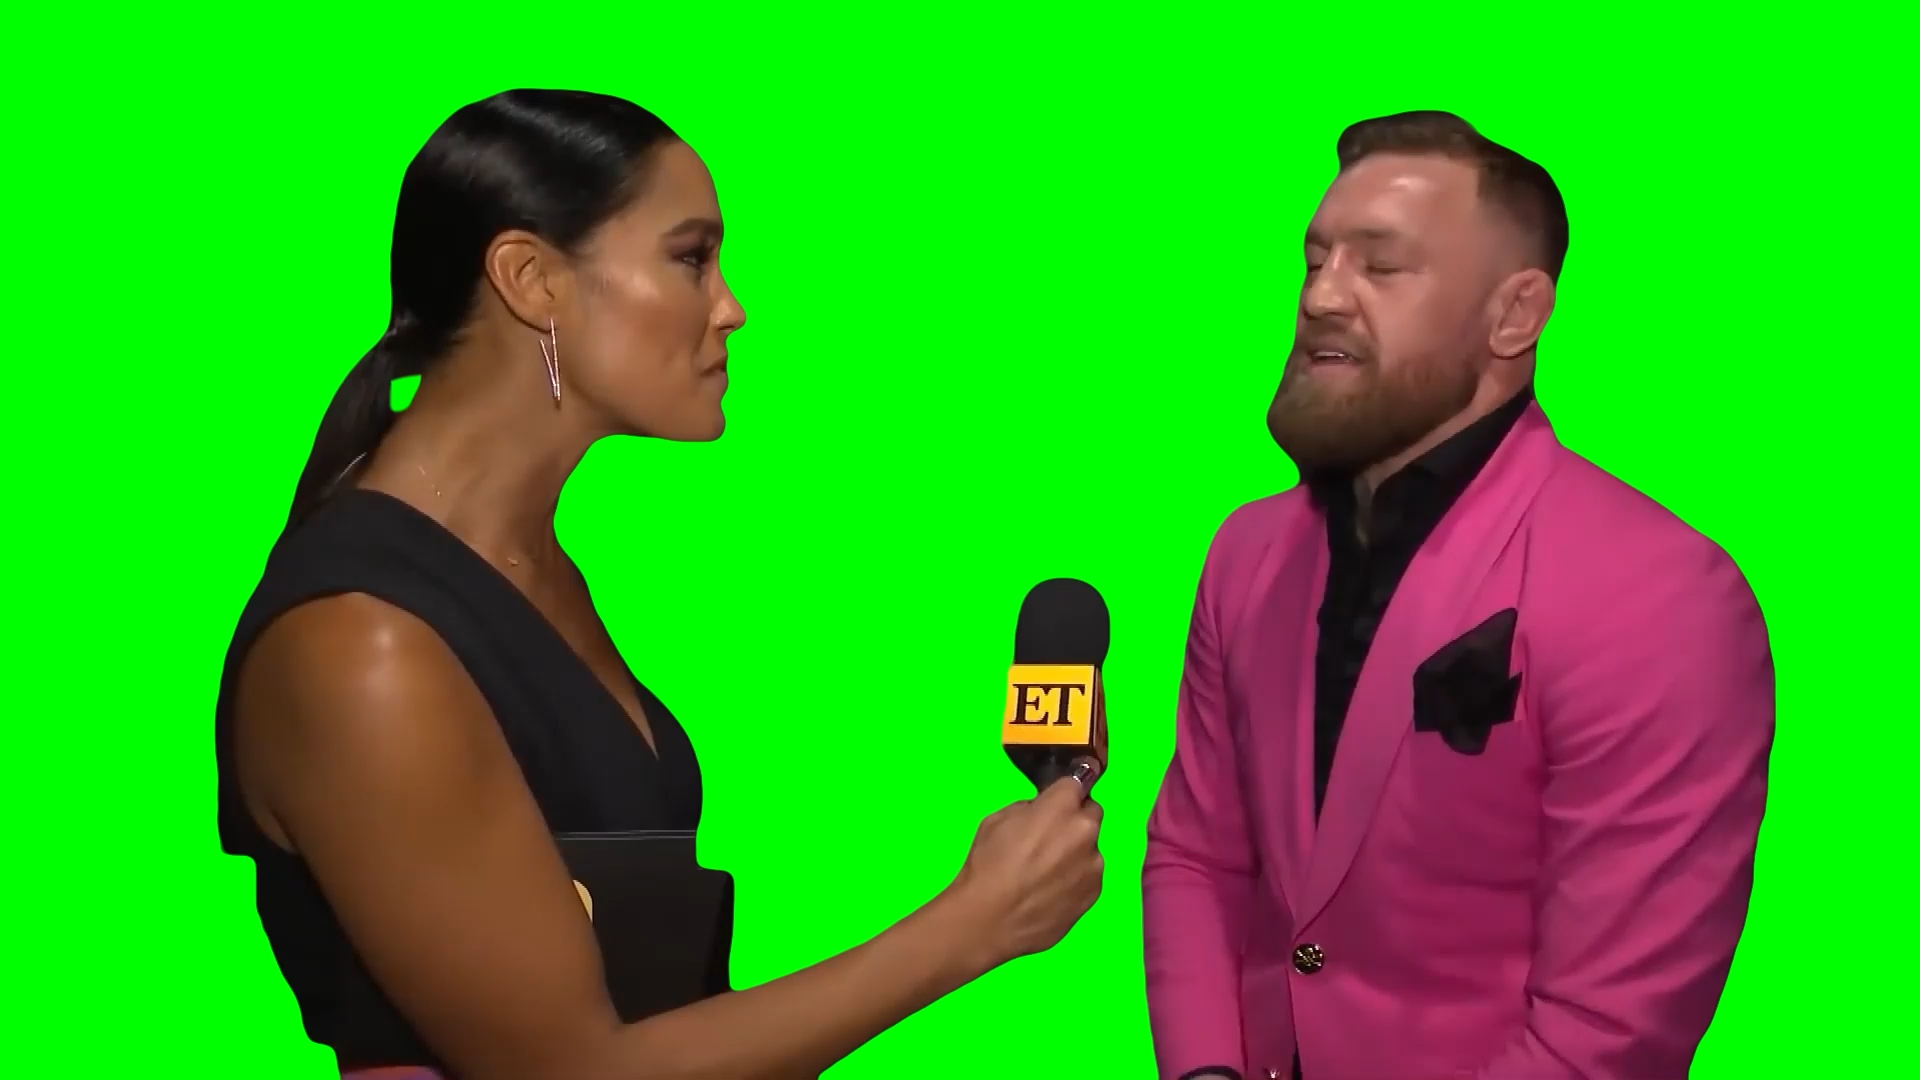 McGregor - I don’t even know the guy (Green Screen)